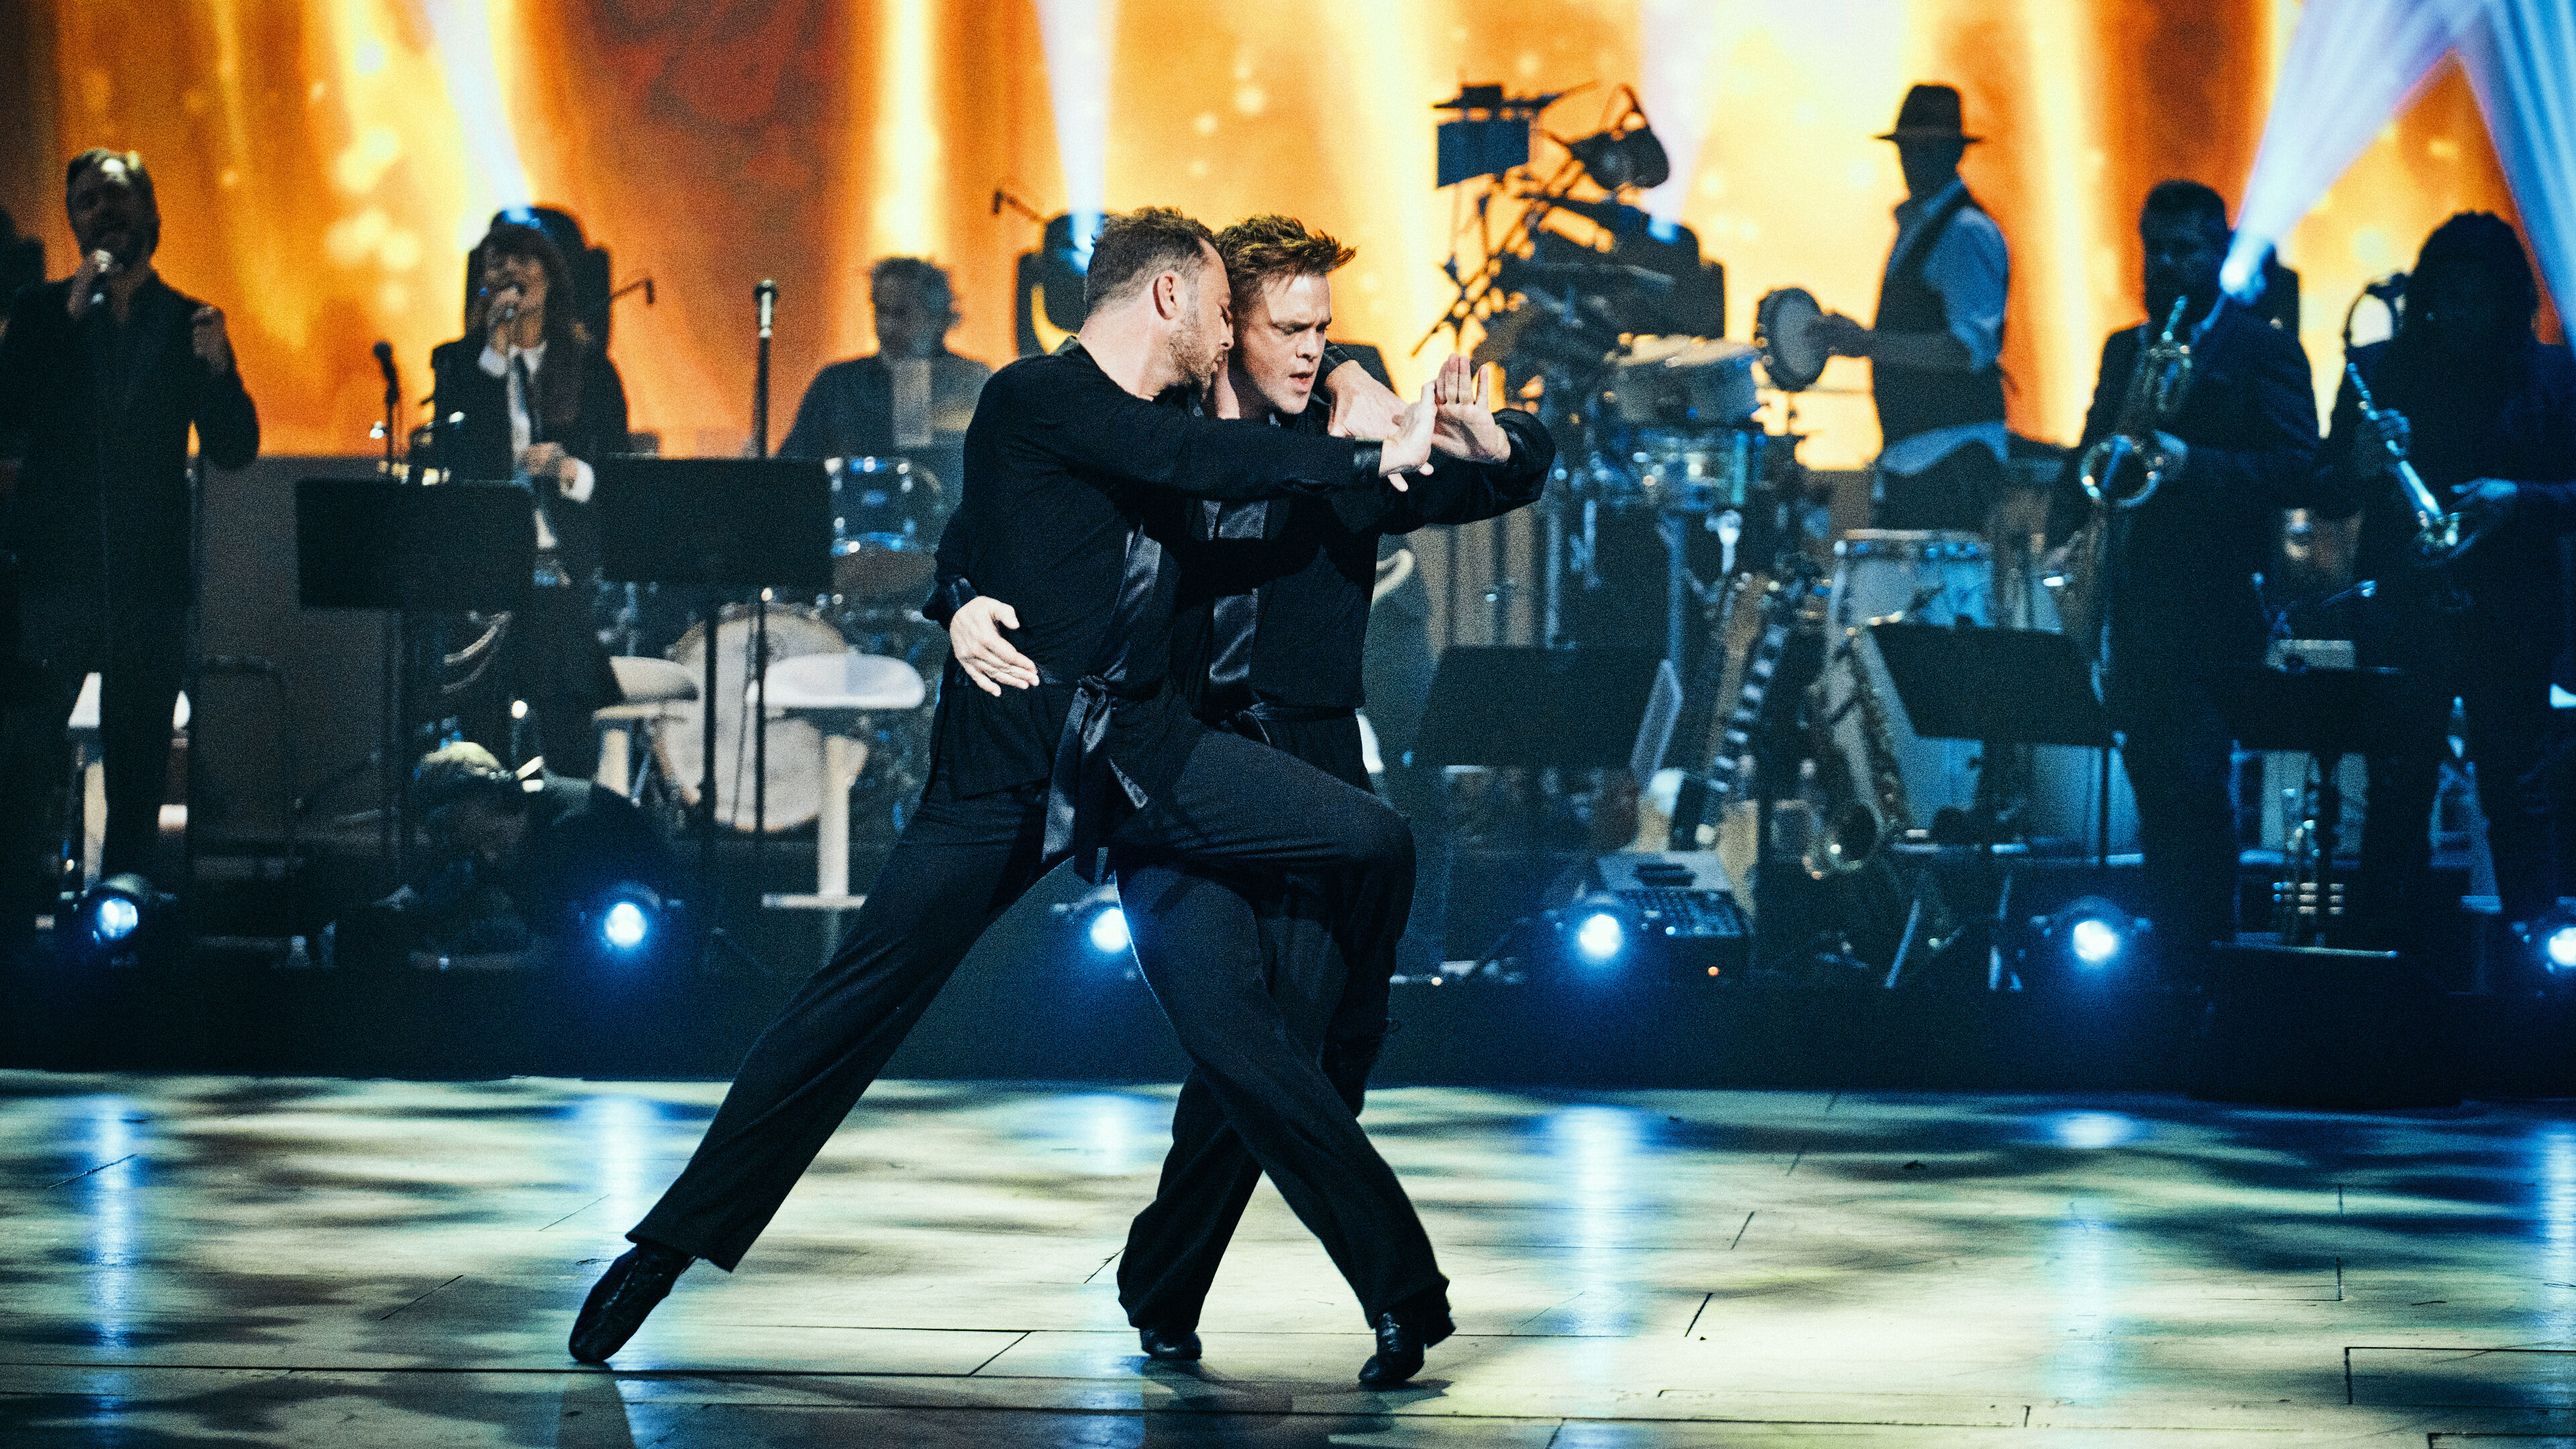 Jakob Fauerby and Silas Holst tear up the floor on Dancing With the Stars Denmark.